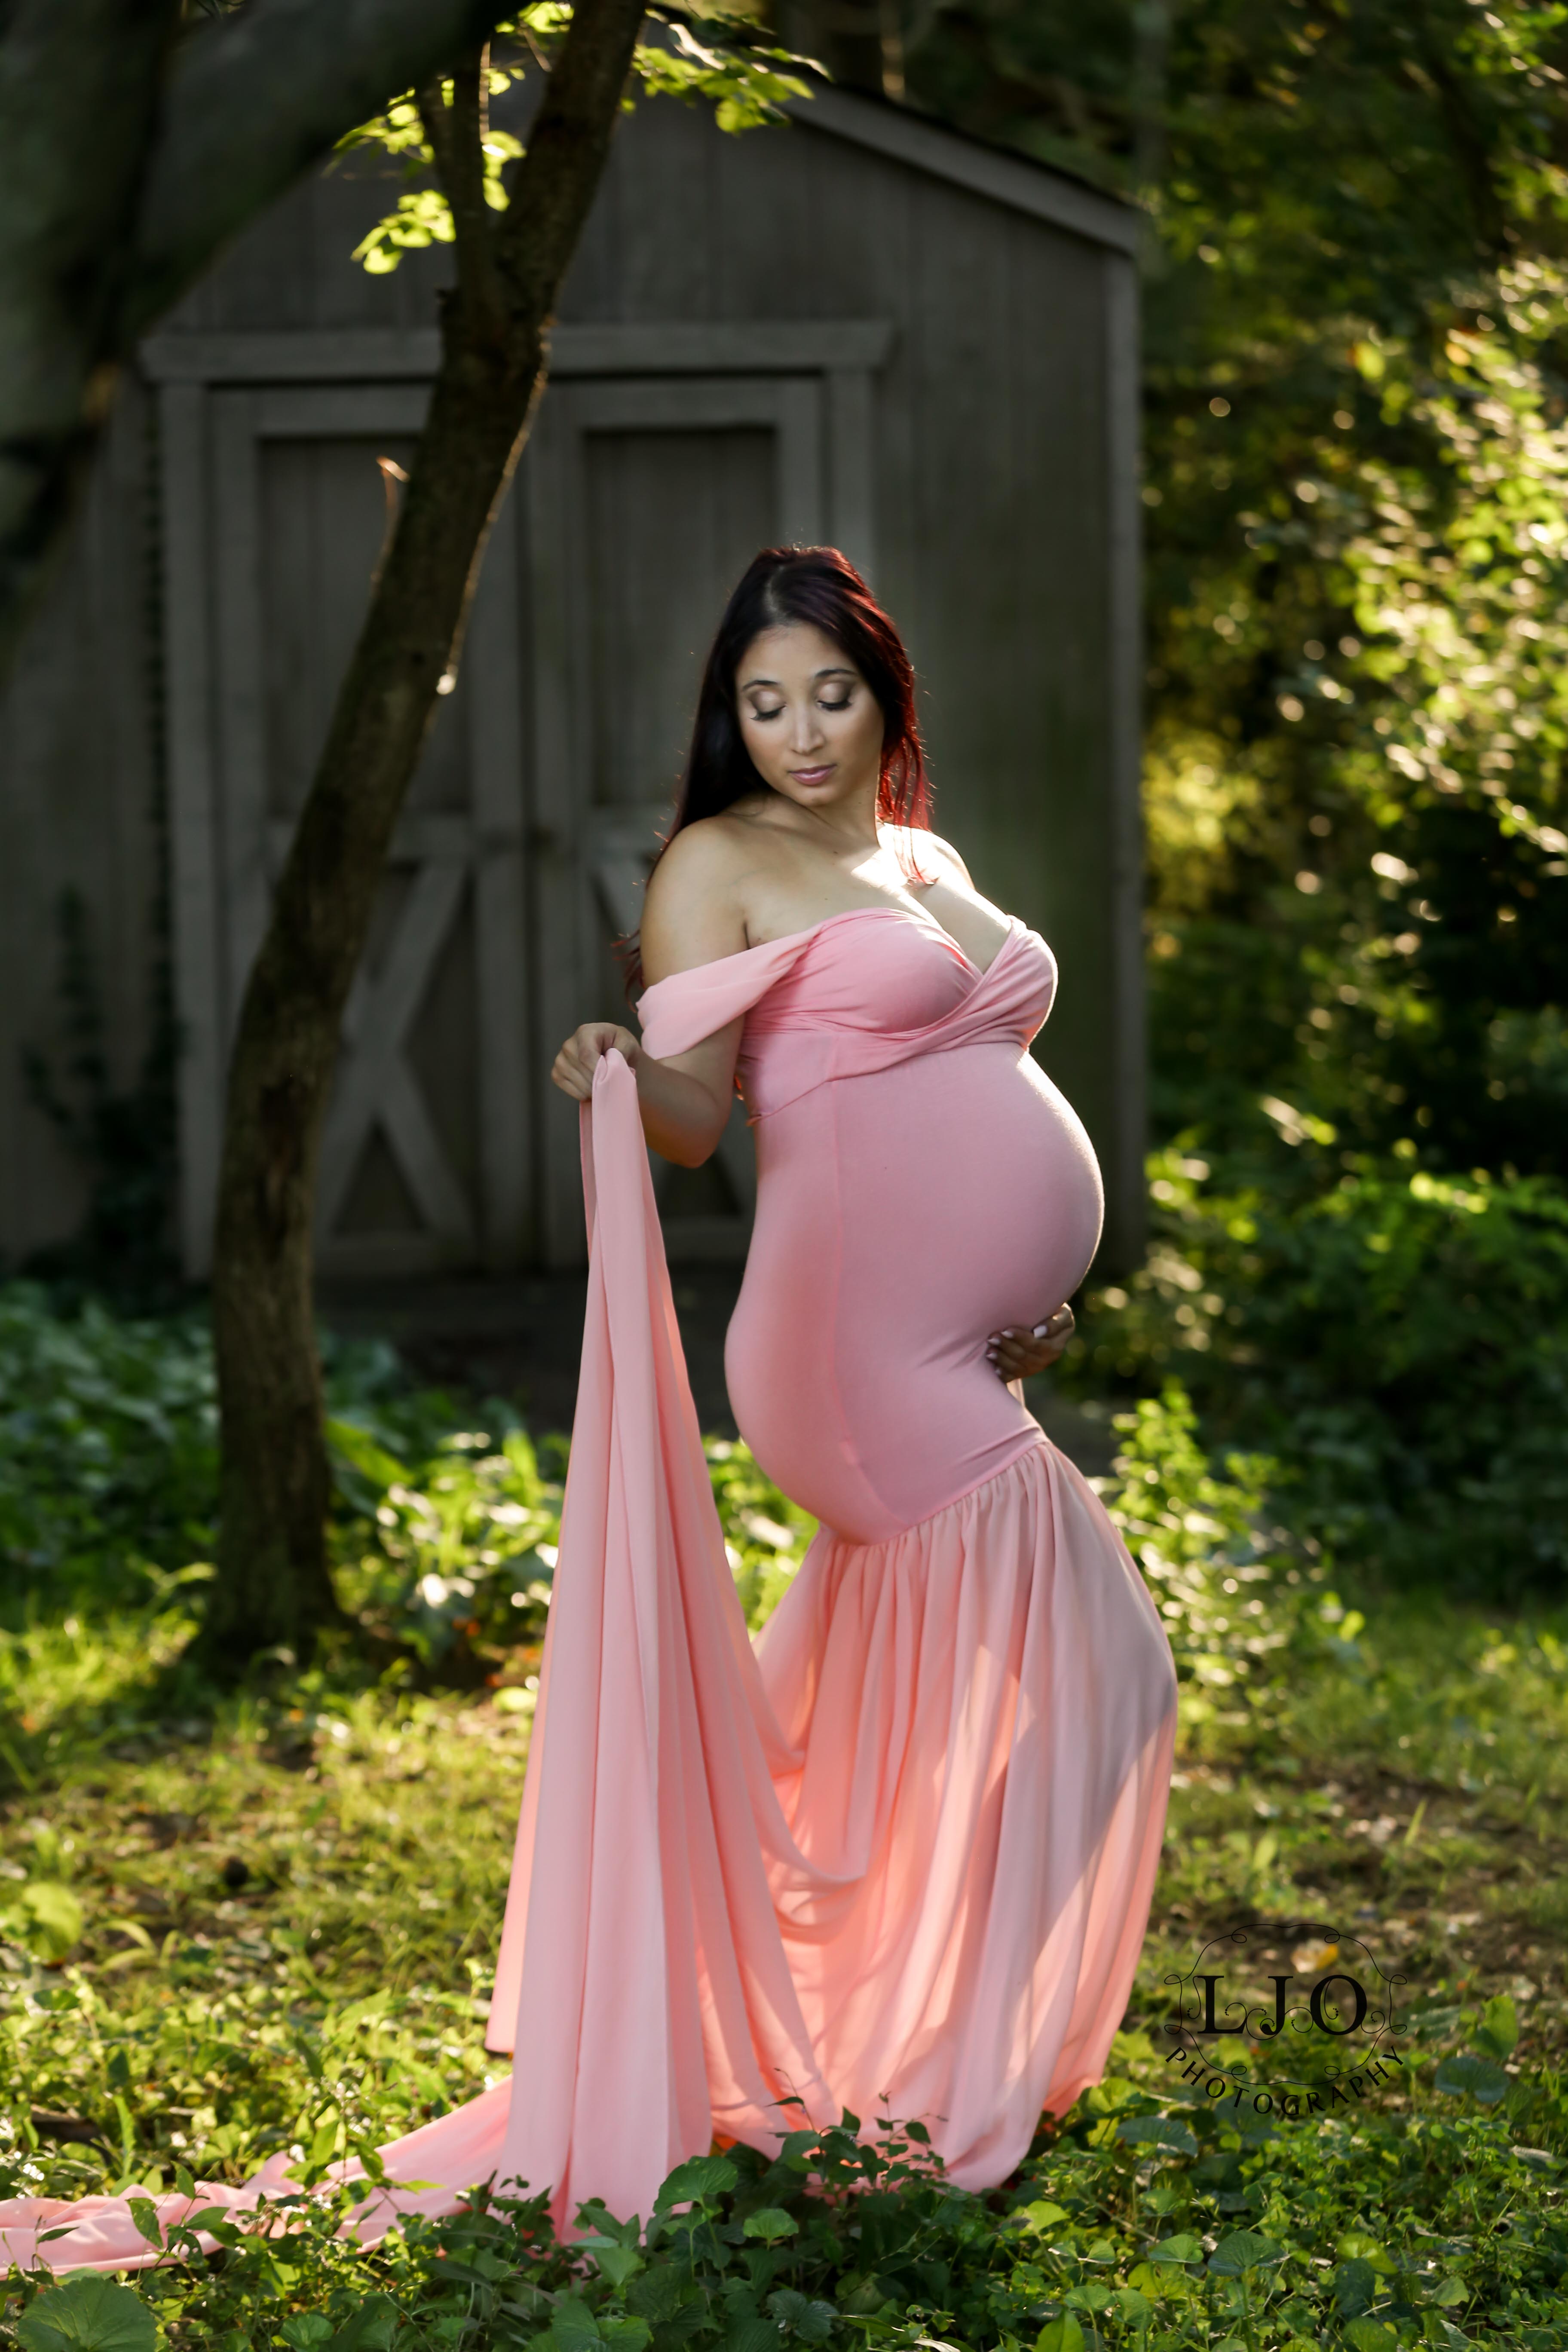 Maternity Body Jewelry Pregnancy couture photo shoot.